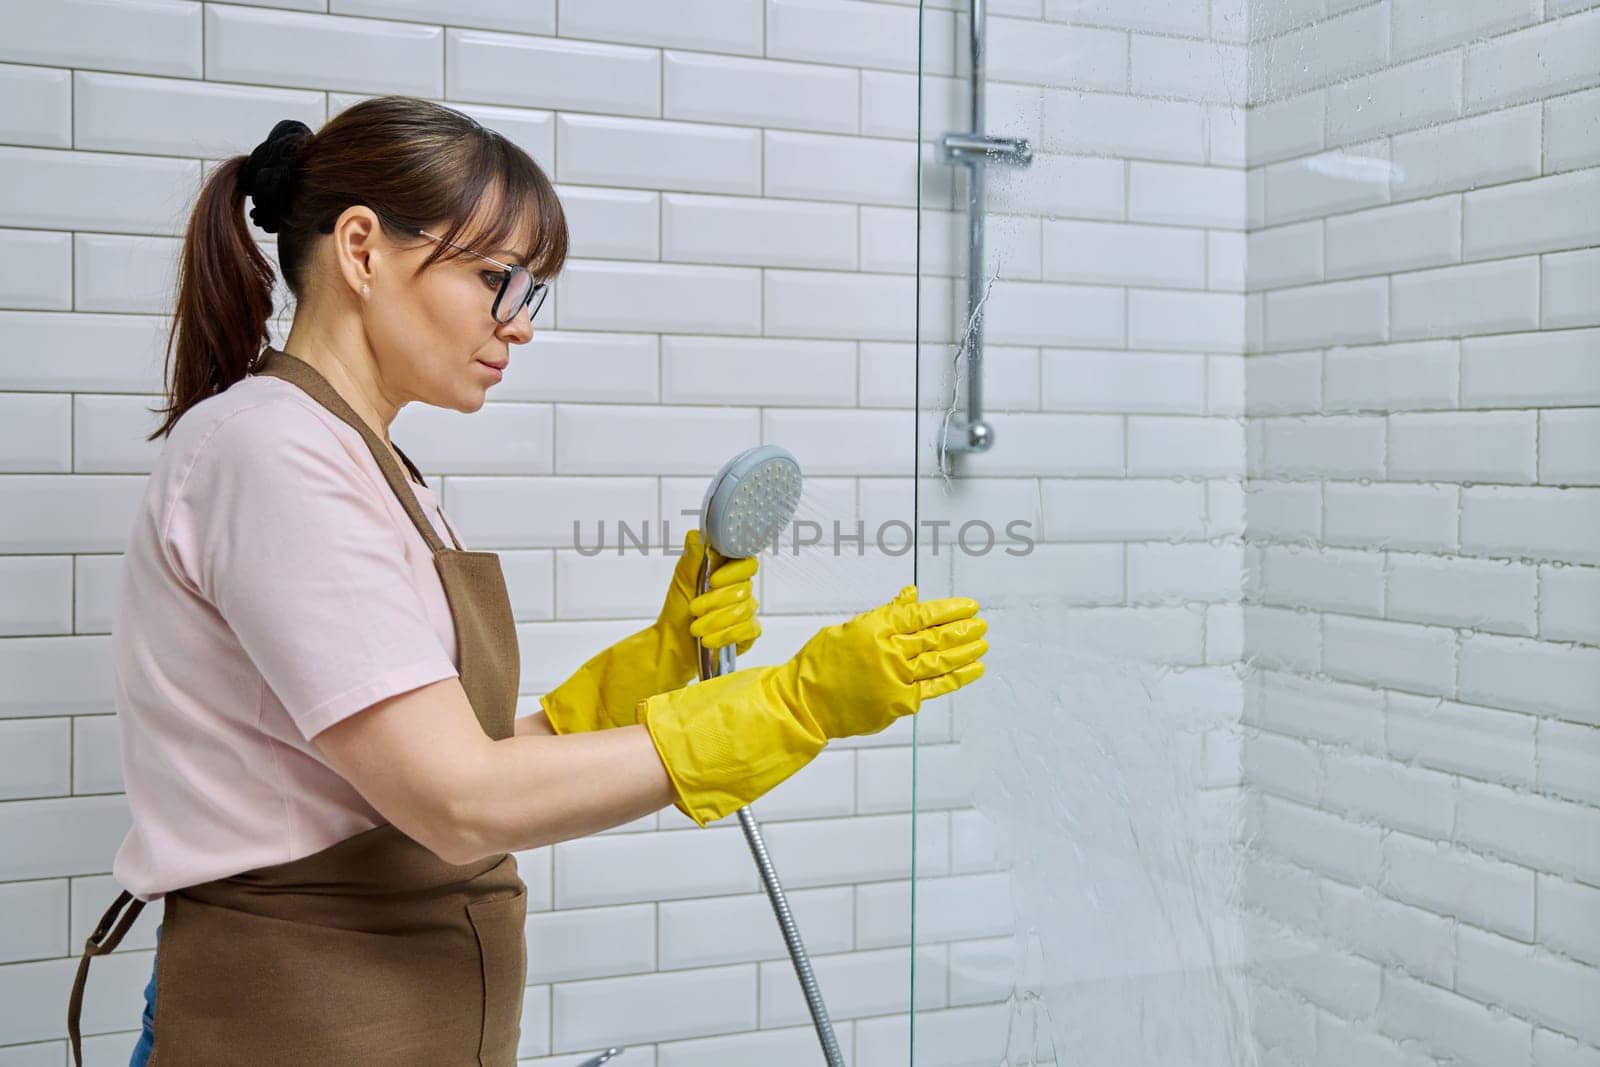 Middle-aged woman in apron, gloves cleaning bathroom, cleans glass in shower. Female housewife cleaning house, service worker at workplace. Home hygiene, housecleaning service, housekeeping, housework